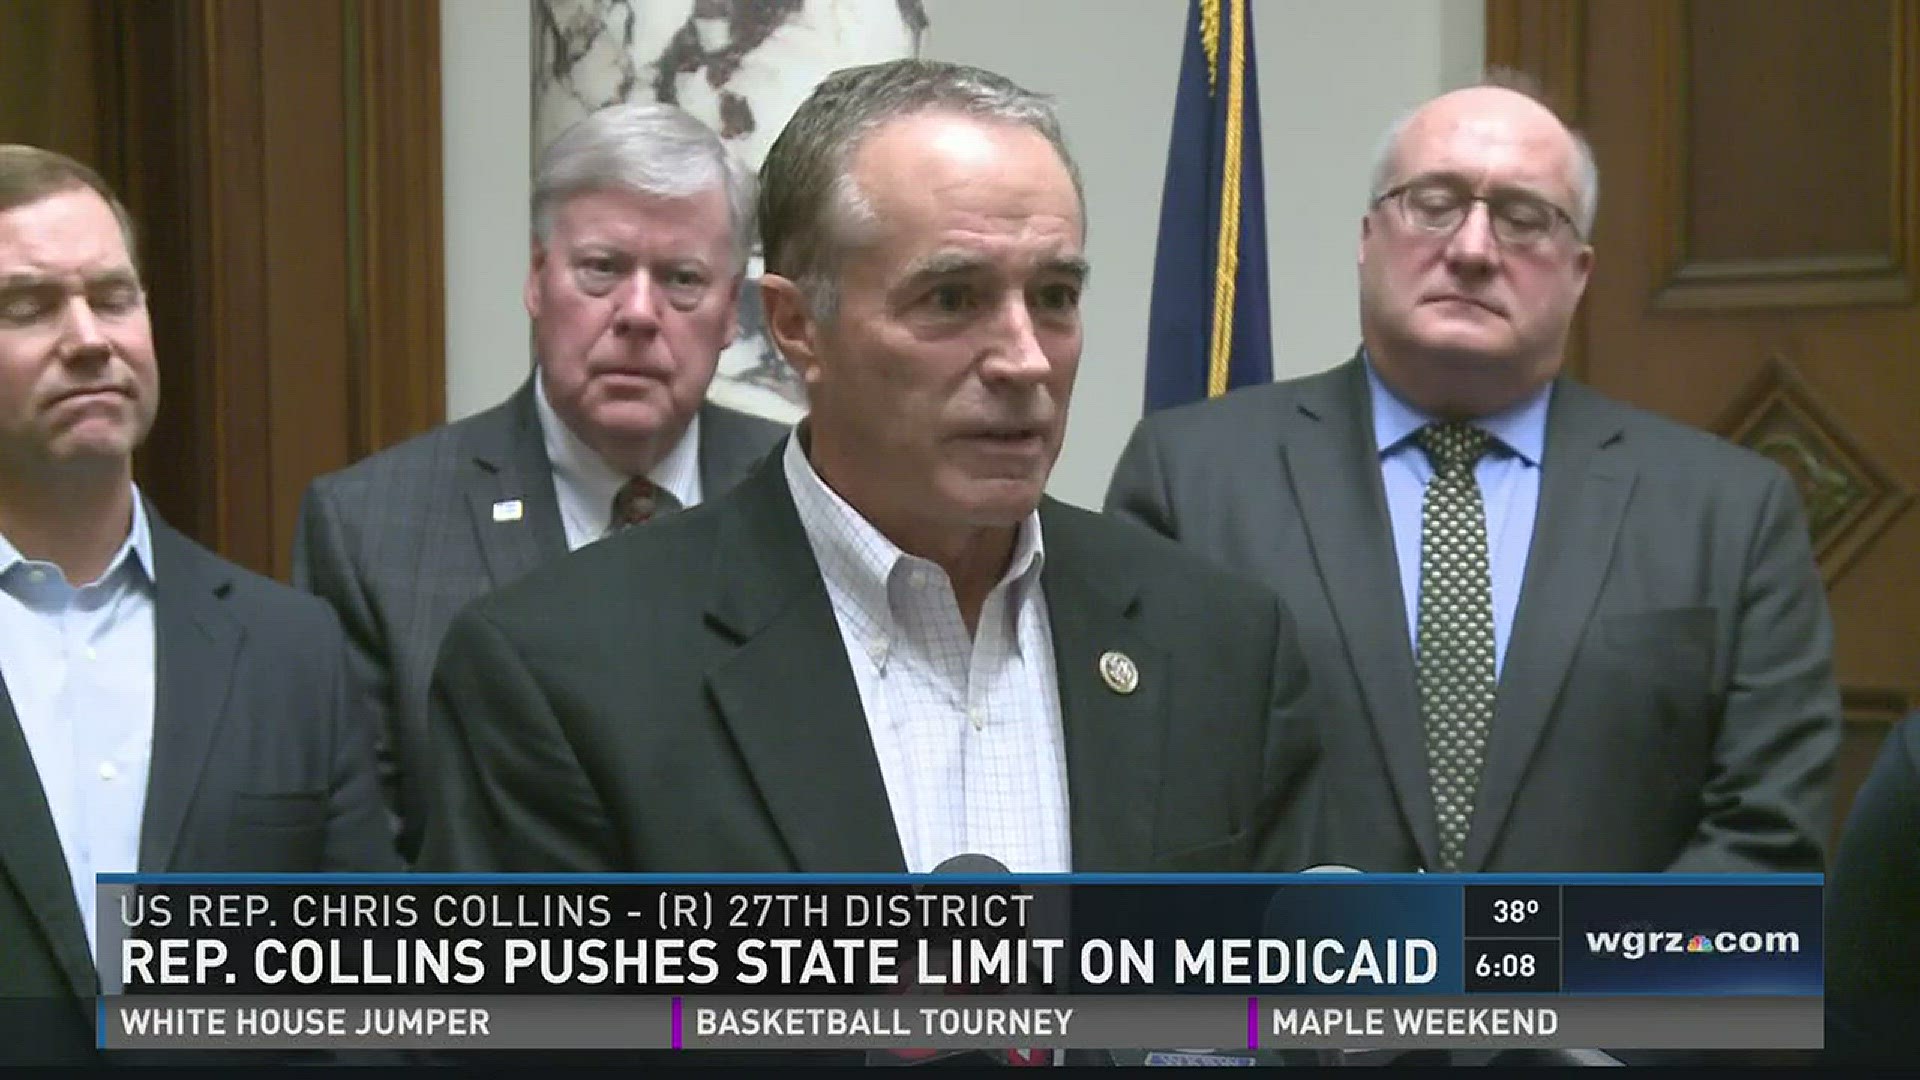 Rep. Collins Pushes State Limit on Medicaid